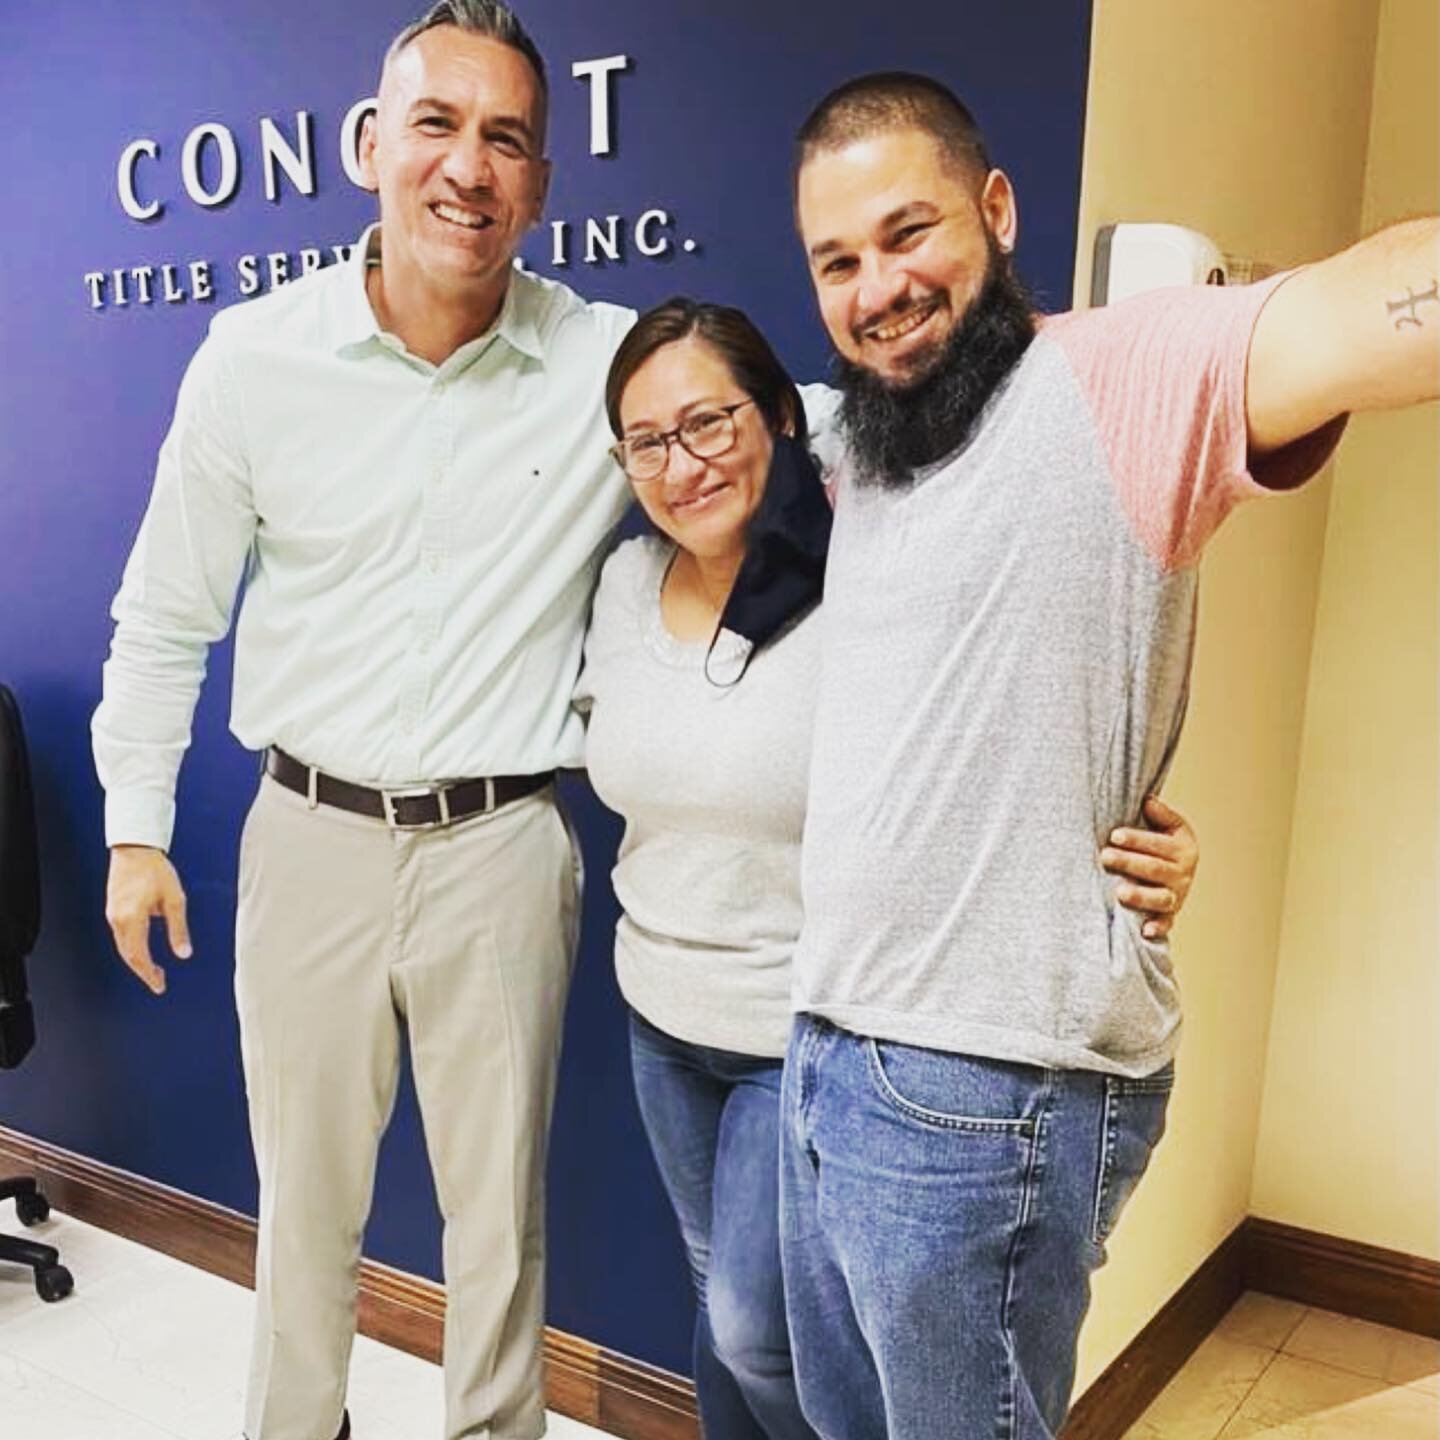 Love this pic!!😀 One of our top real estate brokers, @kev_the_broker, in town and his happy clients, @saroza420 🏚🗝 Smiles all around; we are so glad we could help get this done. ✅ #realestateclosing #titlecompany #realestate #brokersarebetter #mia